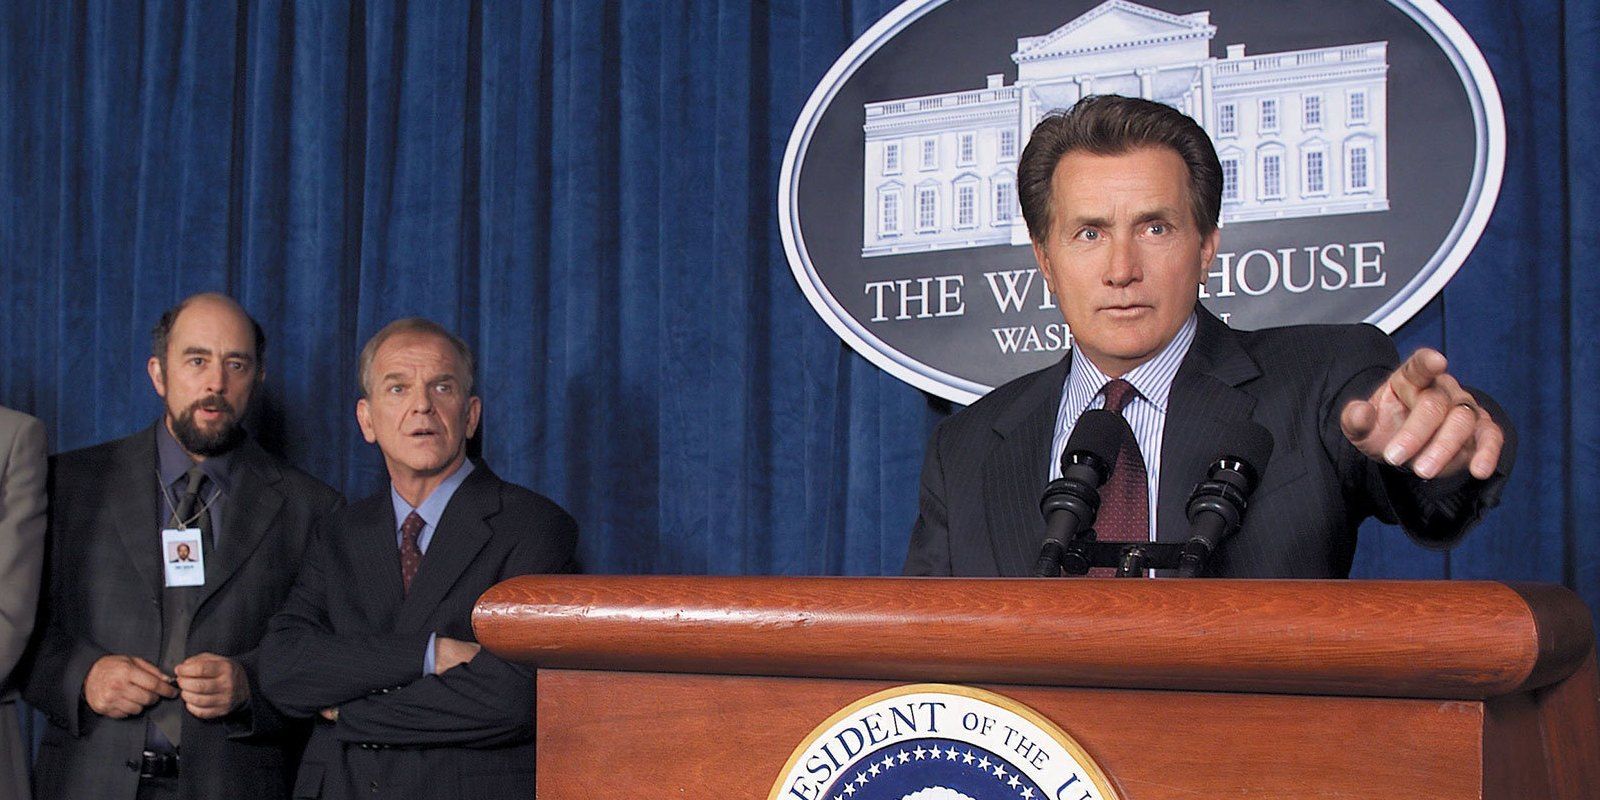 Martin Sheen as President Bartlet in The West Wing 